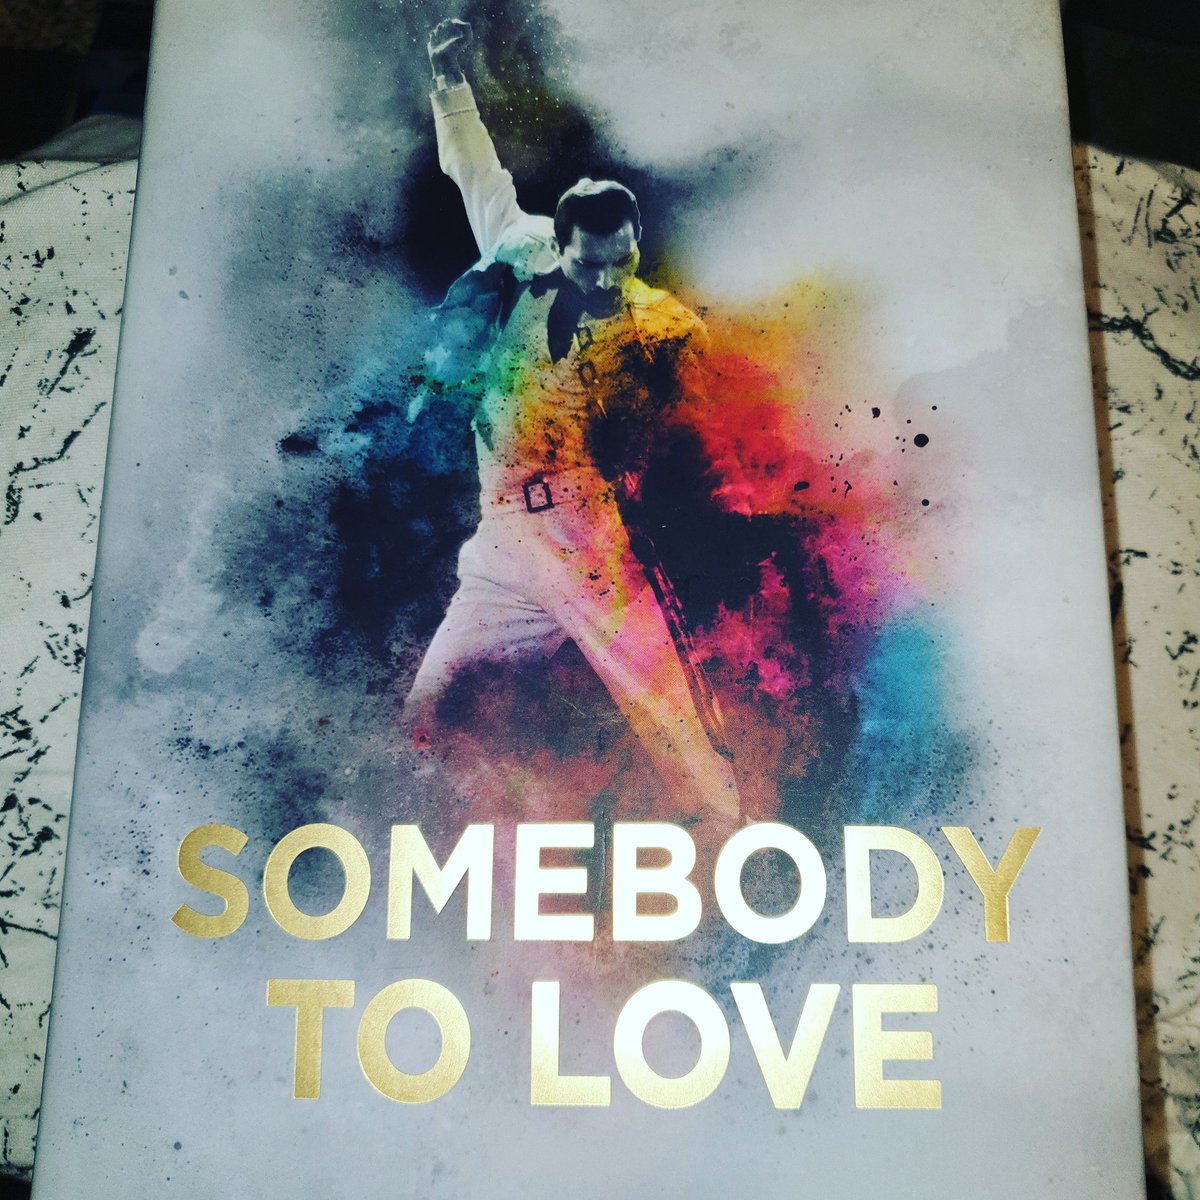 So excited I've been lent this to read. I shall be busy for the next few days... #freddiemercury #freddiemercuryfan #queeb #somebodytolove #freddiemercuryqueen #freddiemercury_thelegend